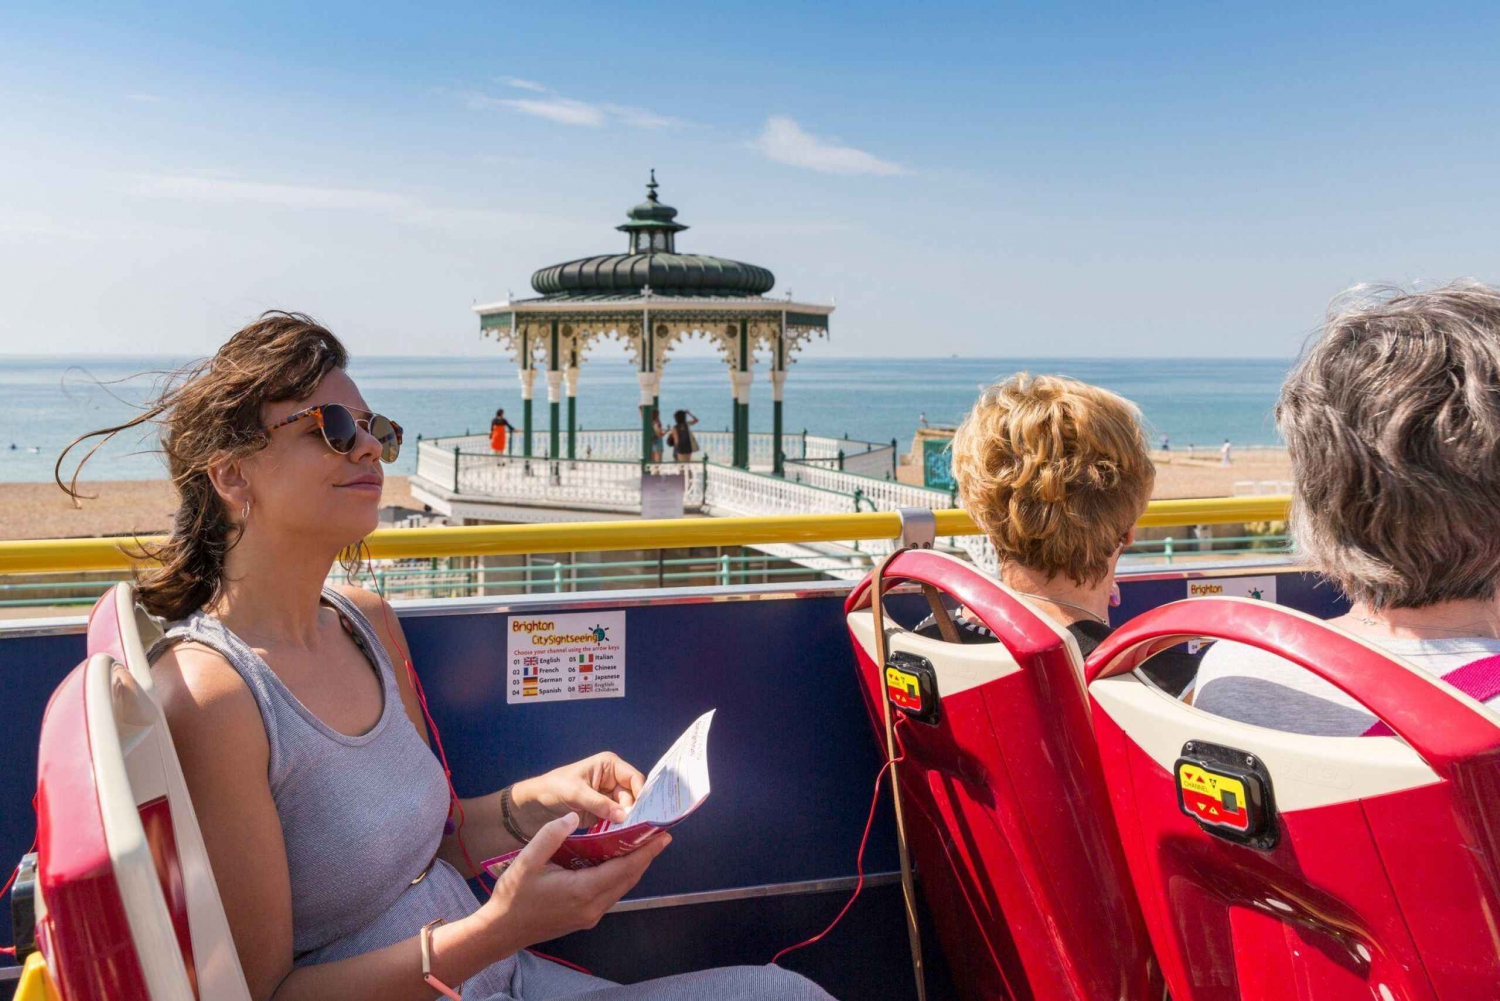 City Sightseeing Brighton: Hop-On Hop-Off Bus Tour